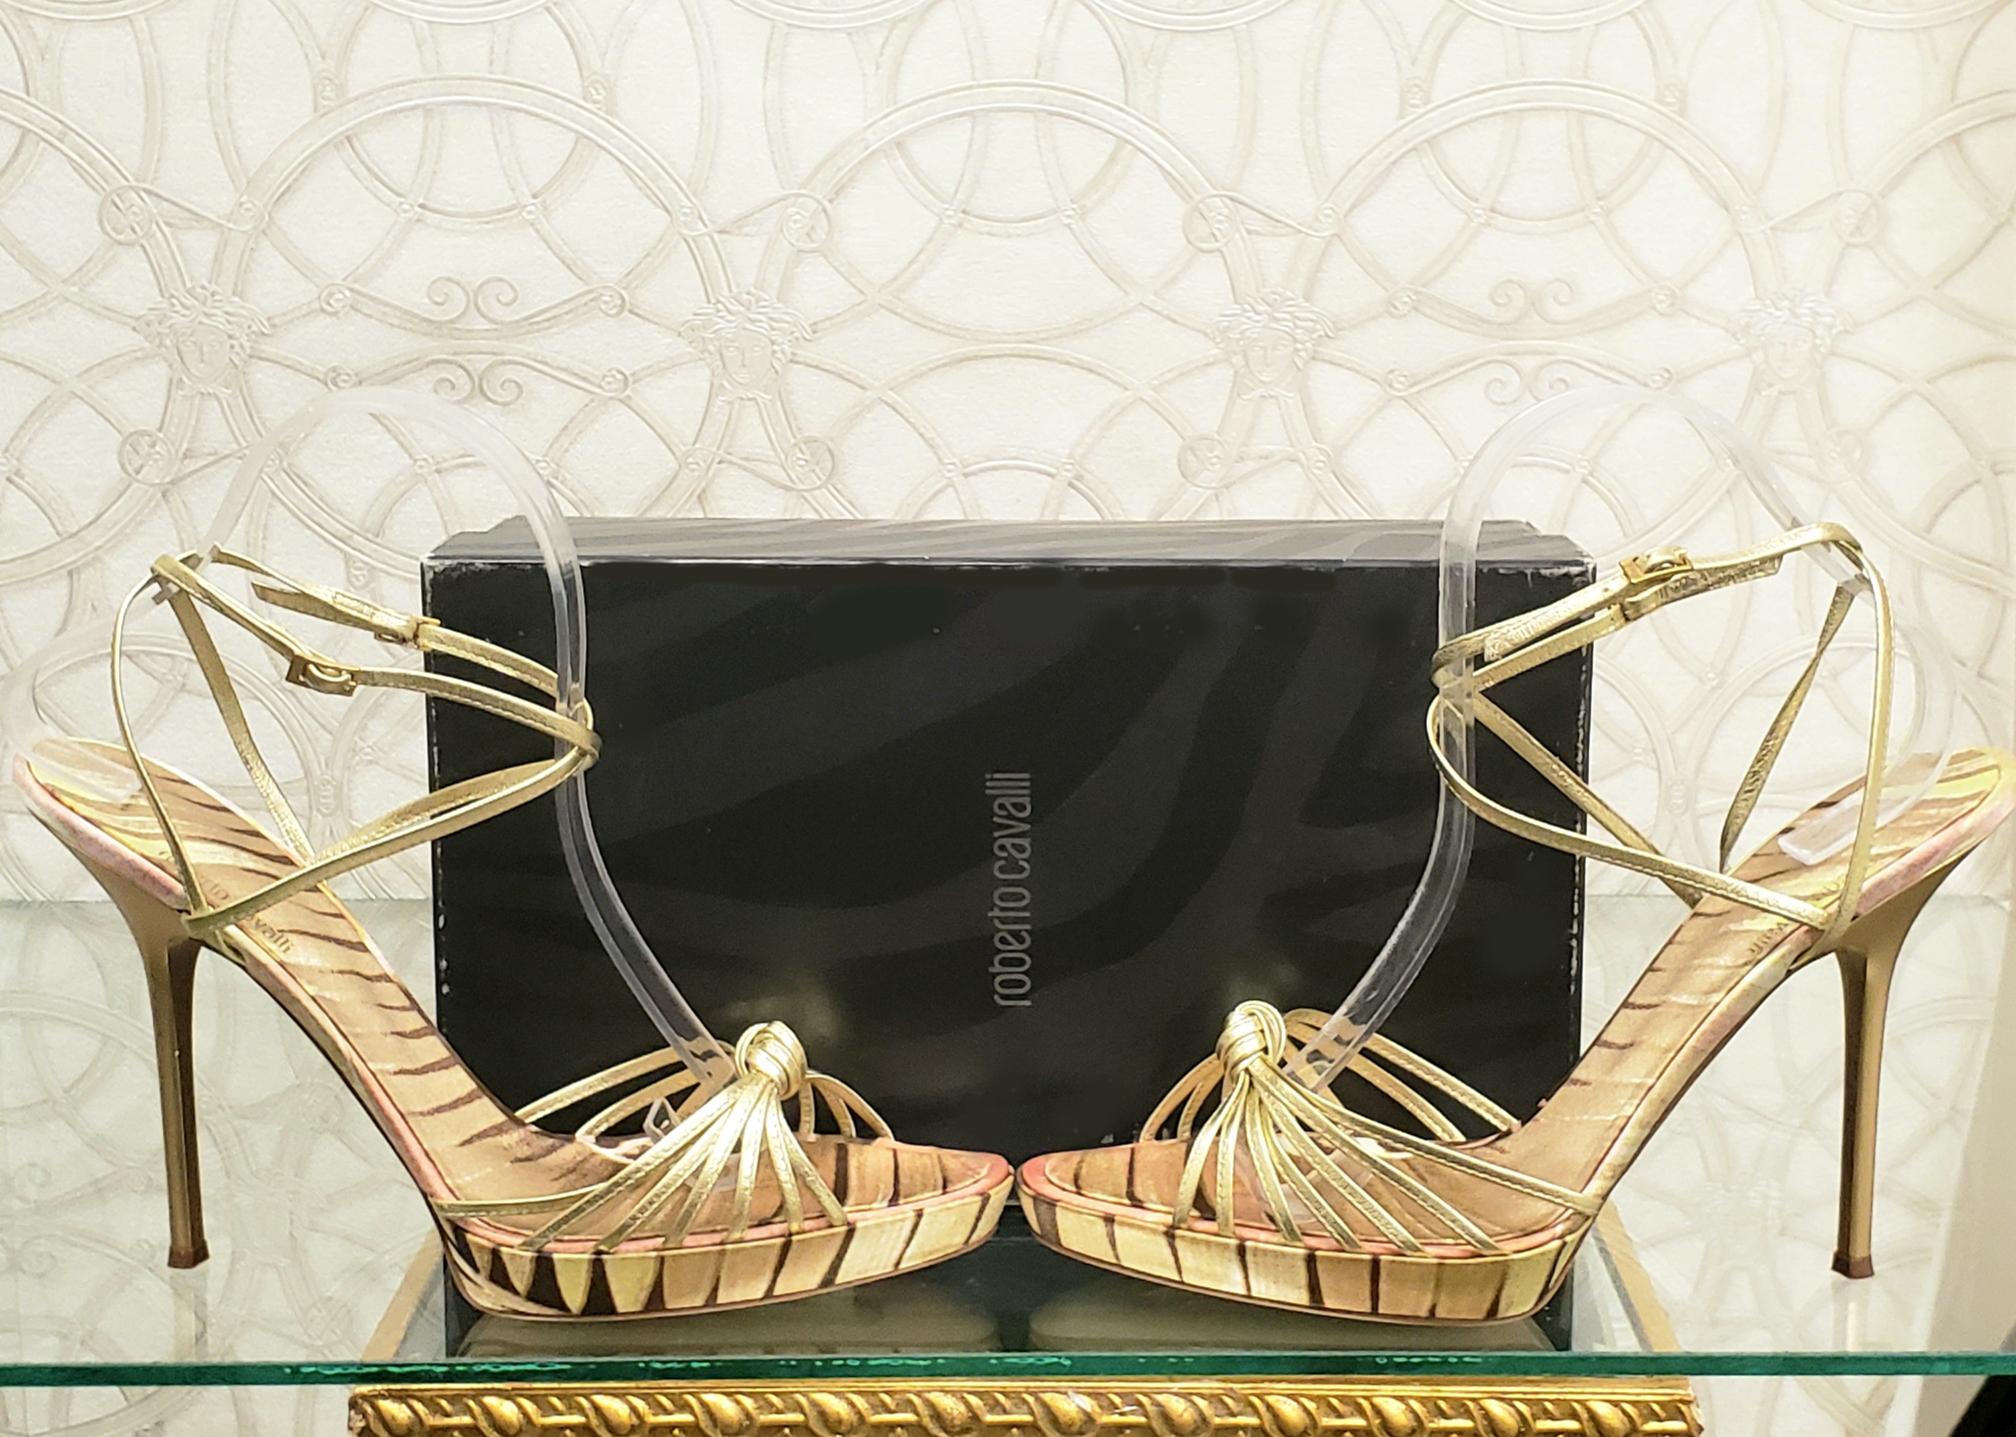 ROBERTO CAVALLI SHOES

Celebrate glamorous times with ROBERTO CAVALLI's chic, high-heeled platforms.
 
Color: Gold
Material: Leather
 Heel measures 5